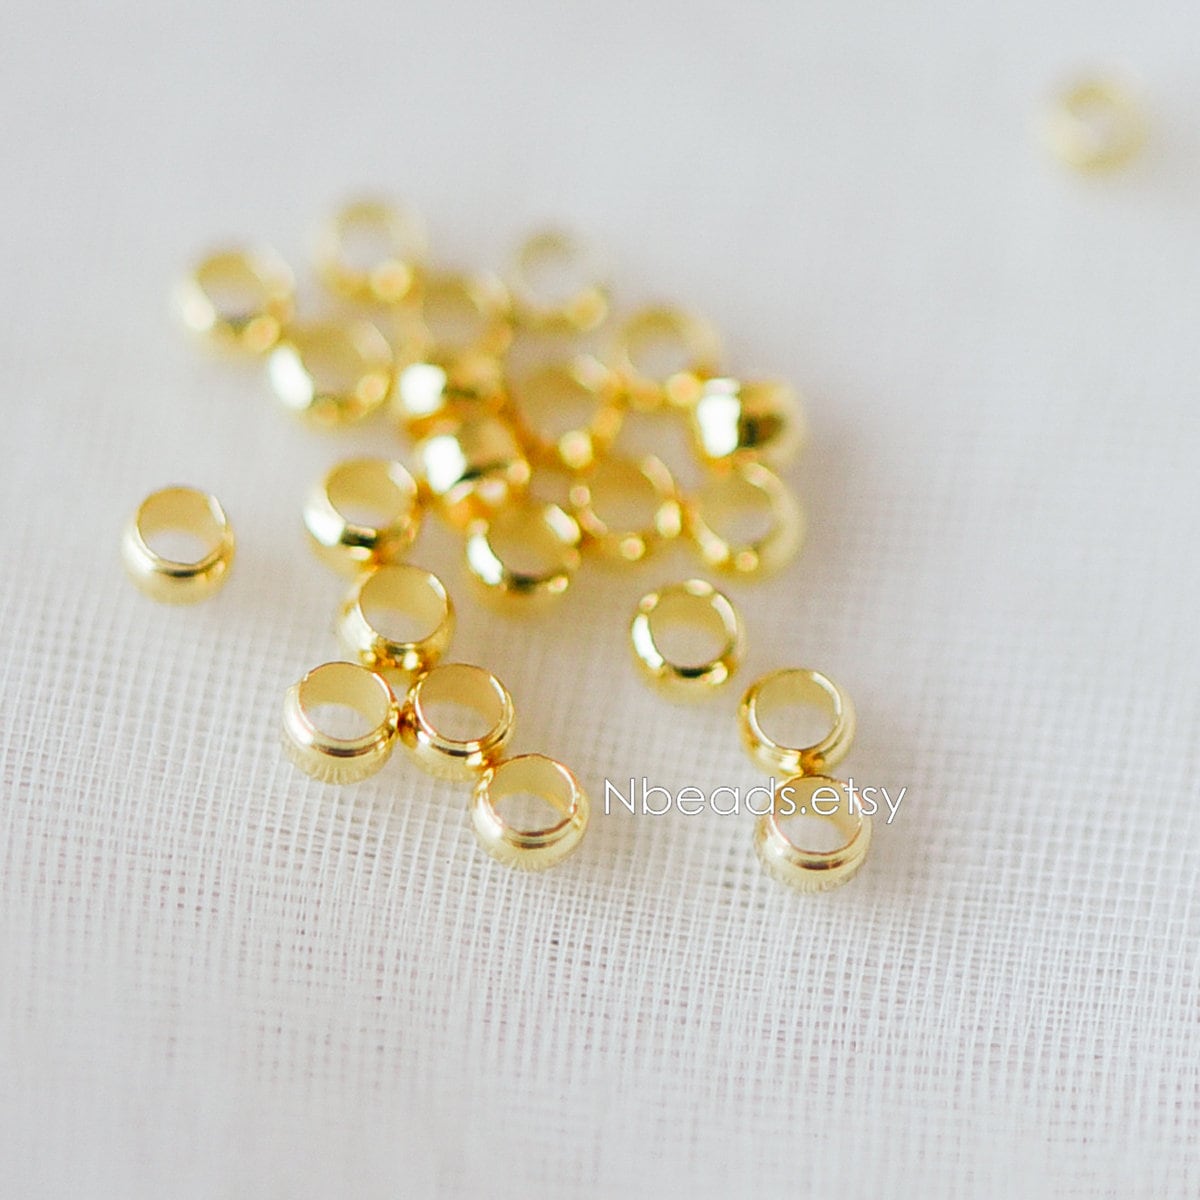 Wholesale 2.5mm Crimp Beads 18K Gold Plated Crimp End Beads For Jewelry  Making Supplies